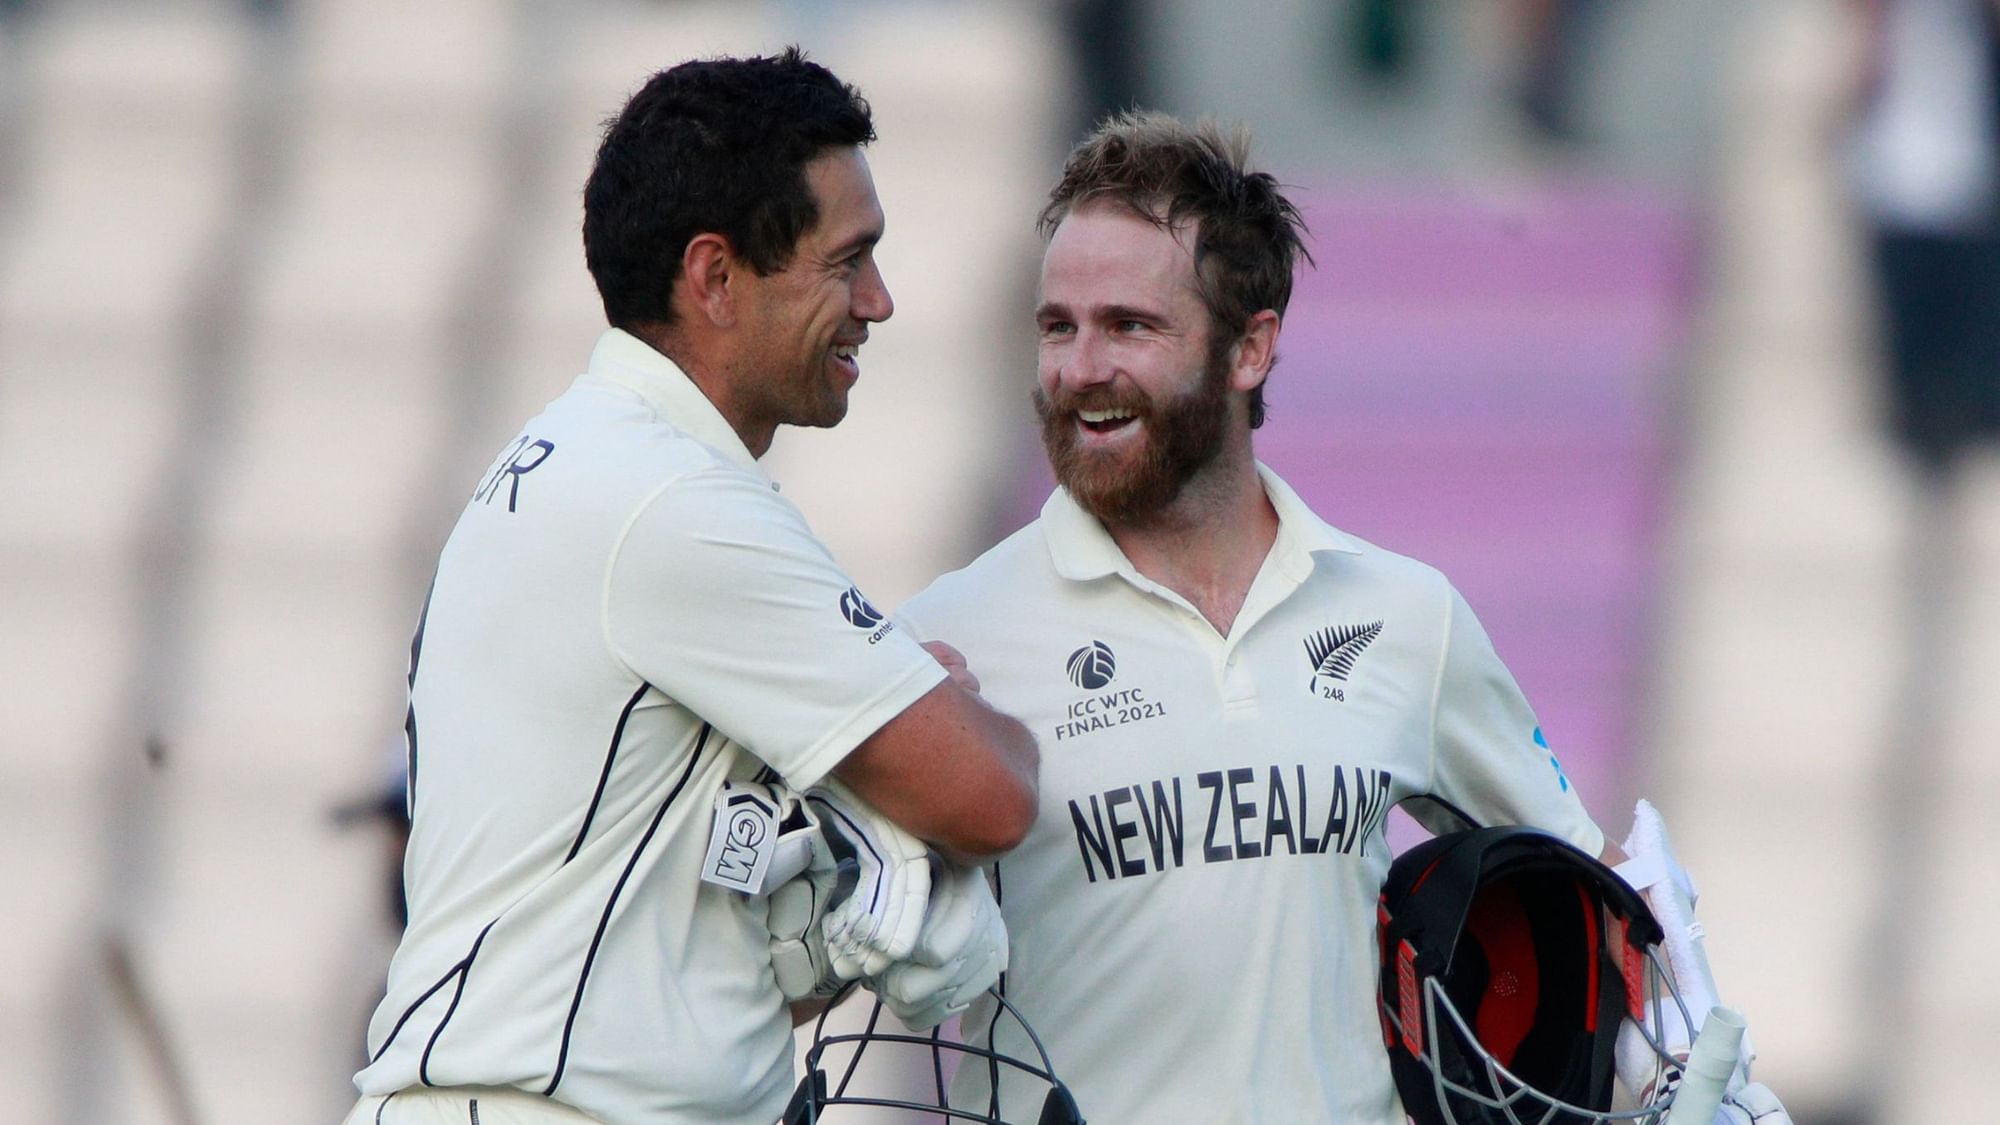 Kane Williamson and Ross Taylor’s 96-run partnership helped New Zealand beat India and win the inaugural World Test Championship.&nbsp;